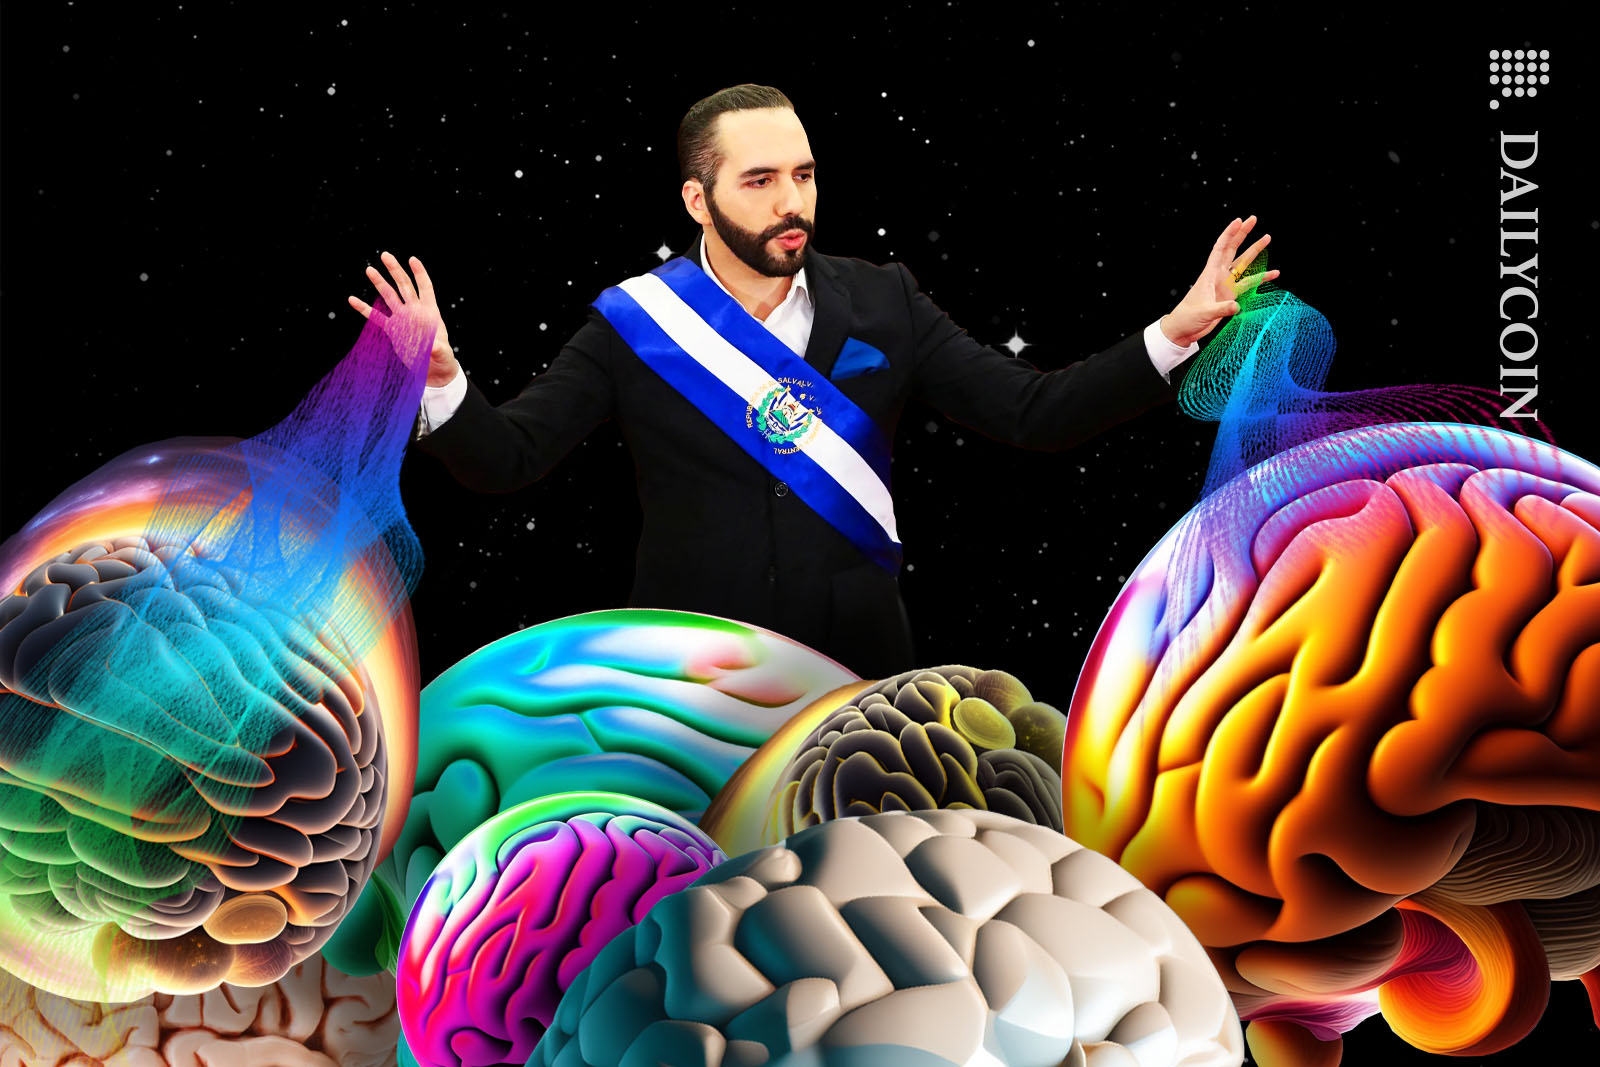 Nayib Bukele extracting knowledge from the large brains he is surrounded by.